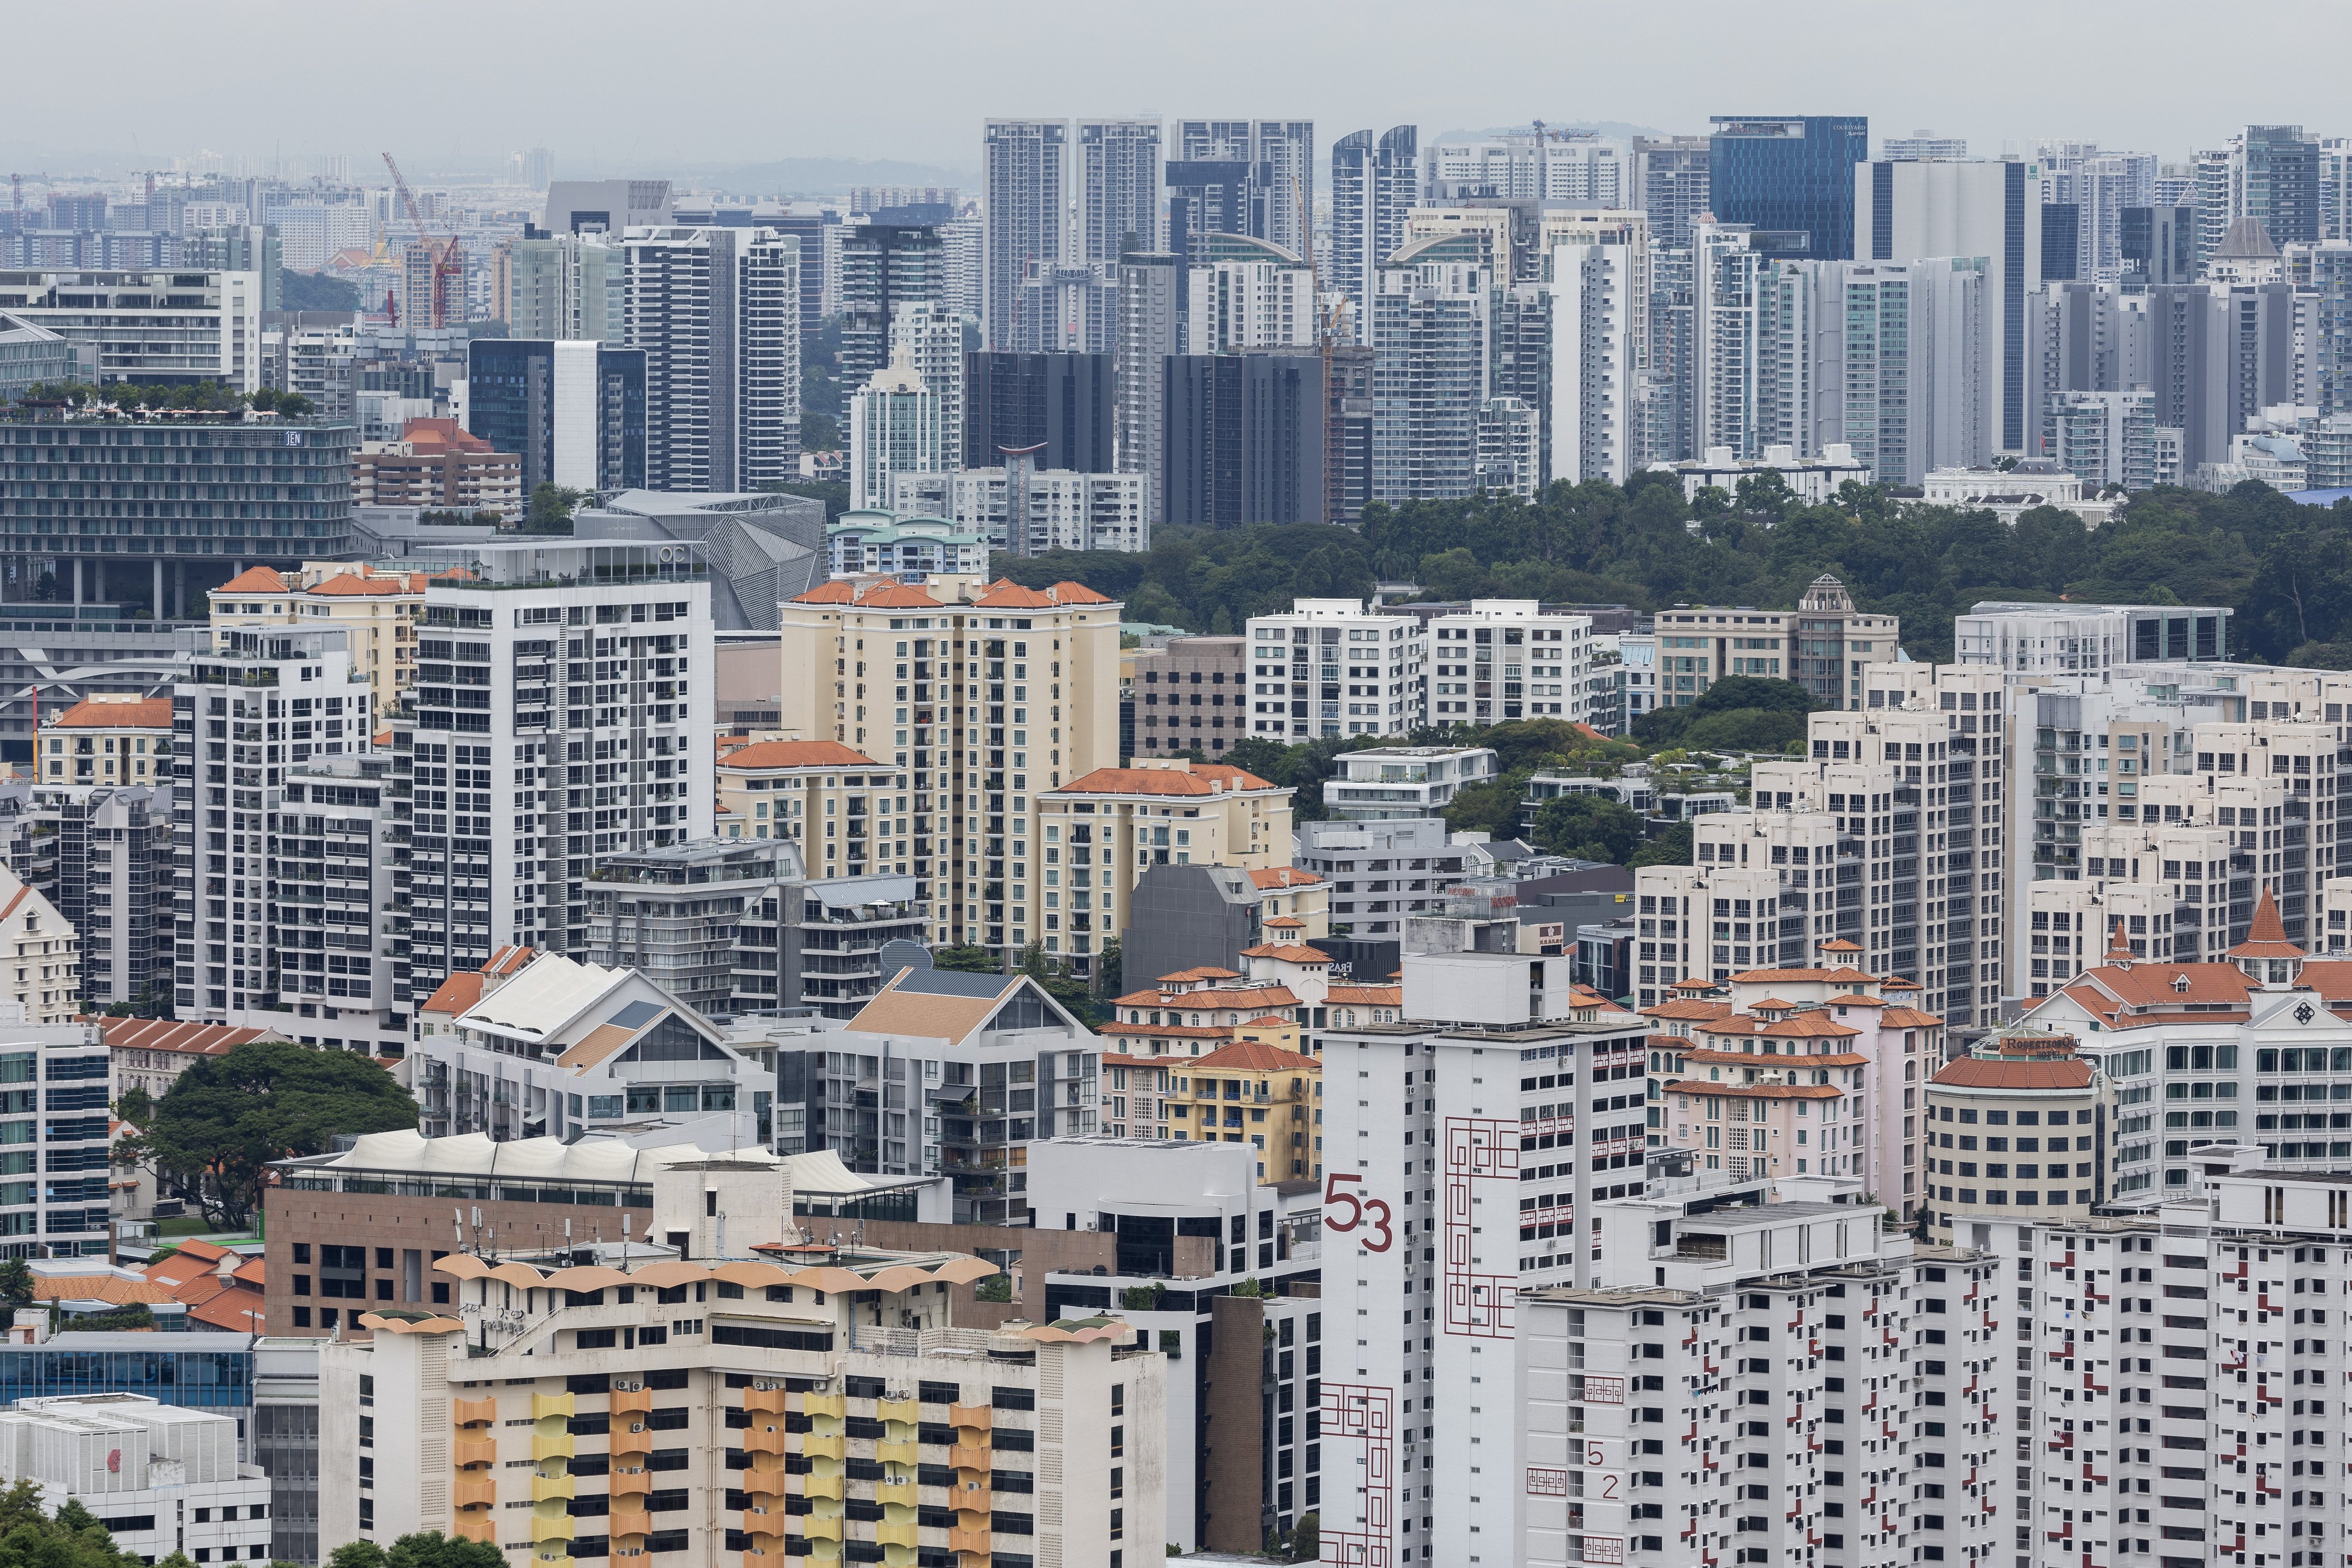 Residential properties in Singapore. Police said at least 77 victims had been asked to meet up with the fake property agents’ “personal assistants”, who would help facilitate the property viewing, before being pressured into making payments. Photo: EPA-EFE